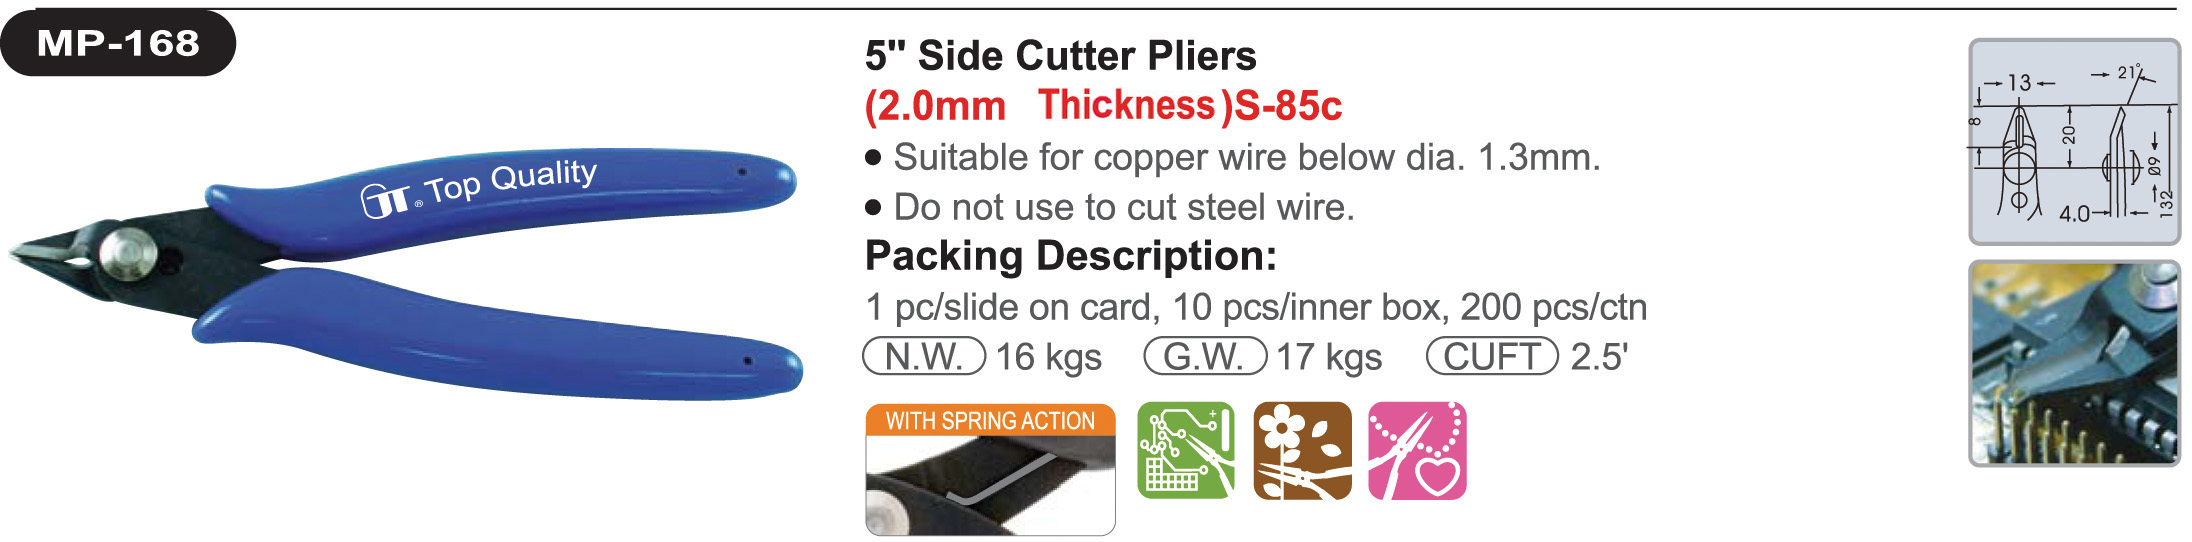 proimages/product/pliers/cutting_pliers/Diagonal_Cutters/MP-168/MP-168_00.jpg